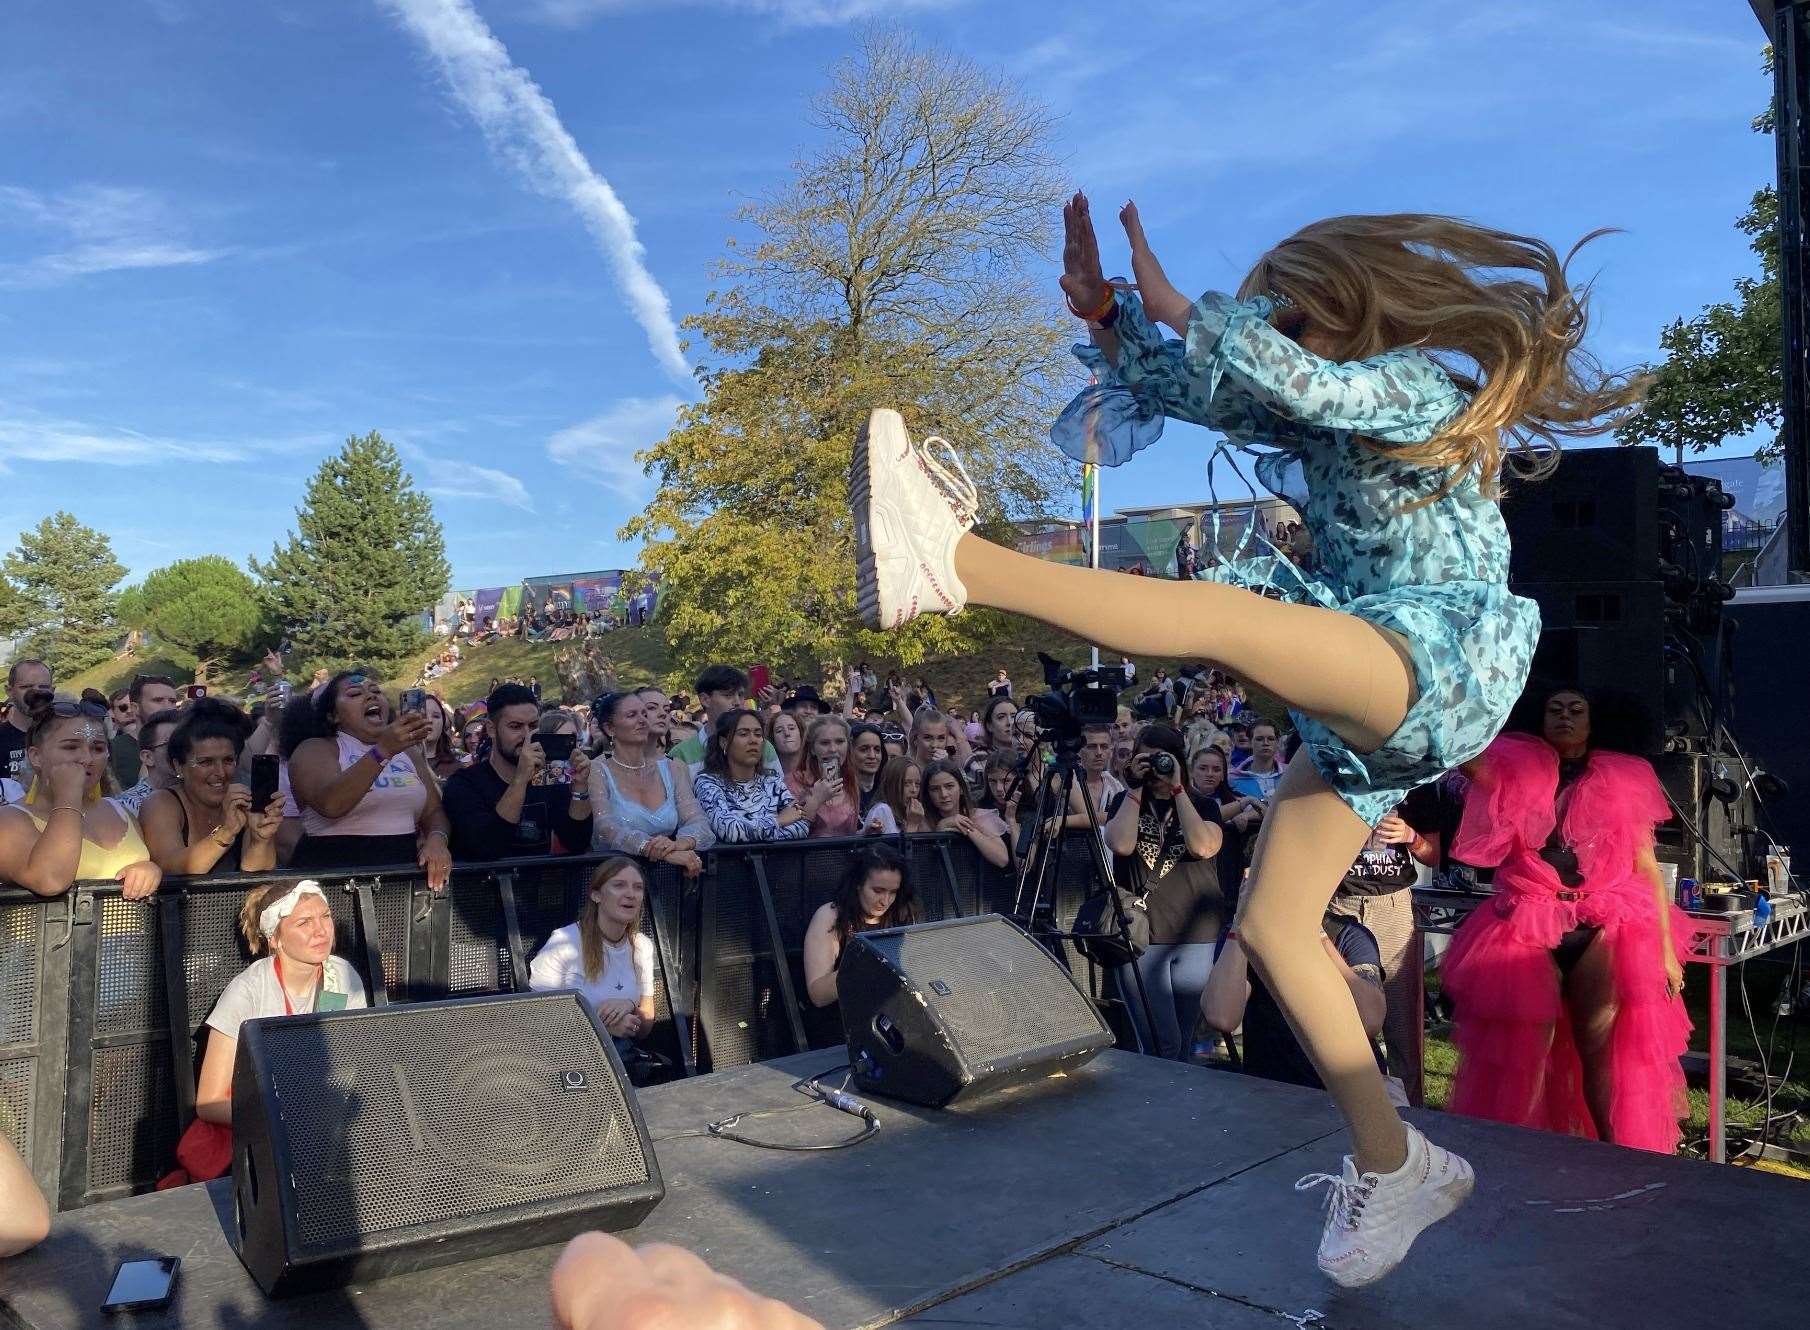 Miss Oatie T performed the signature 'death-drop' in front of the crowd in Canterbury